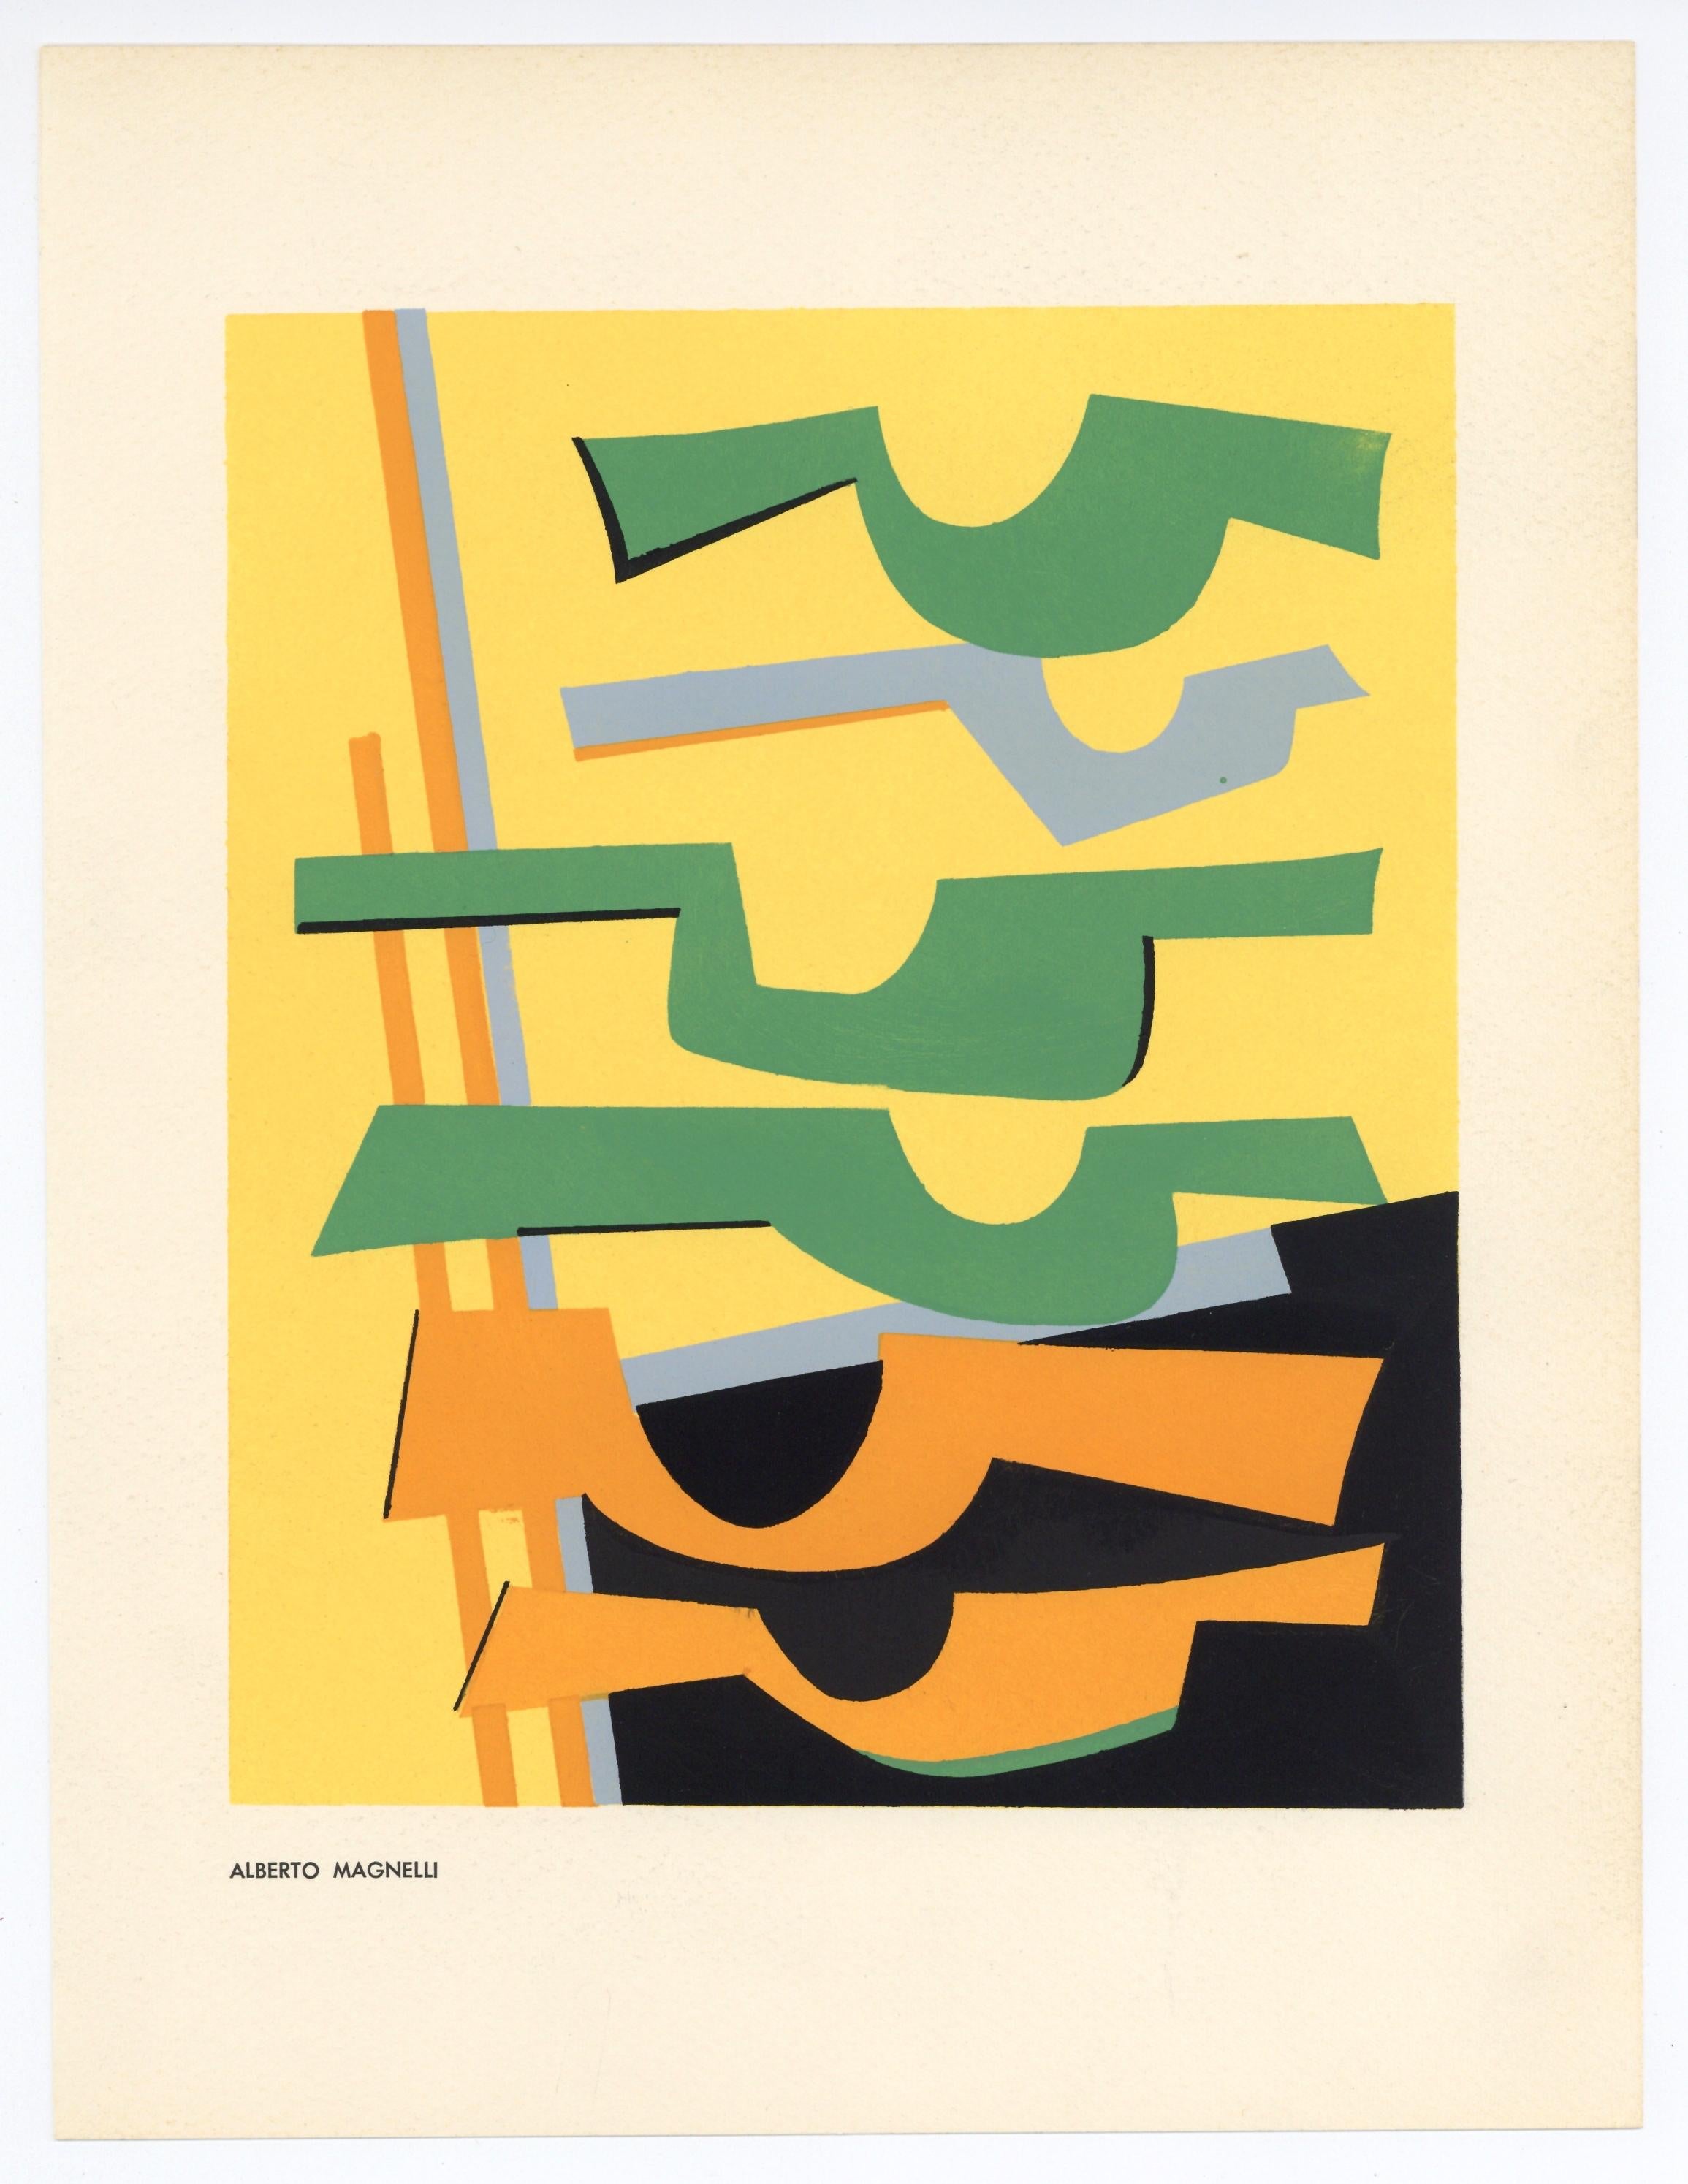 Medium: serigraph (after Magnelli). Printed in Paris in 1952 and published by Editions d'Art d'Aujourd'hui, of Boulogne. Image size: 8 1/2 x 7 inches (216 x 177 mm). Sheet size: 12 x 9 inches (302 x 230 mm). This is a richly inked impression on wove